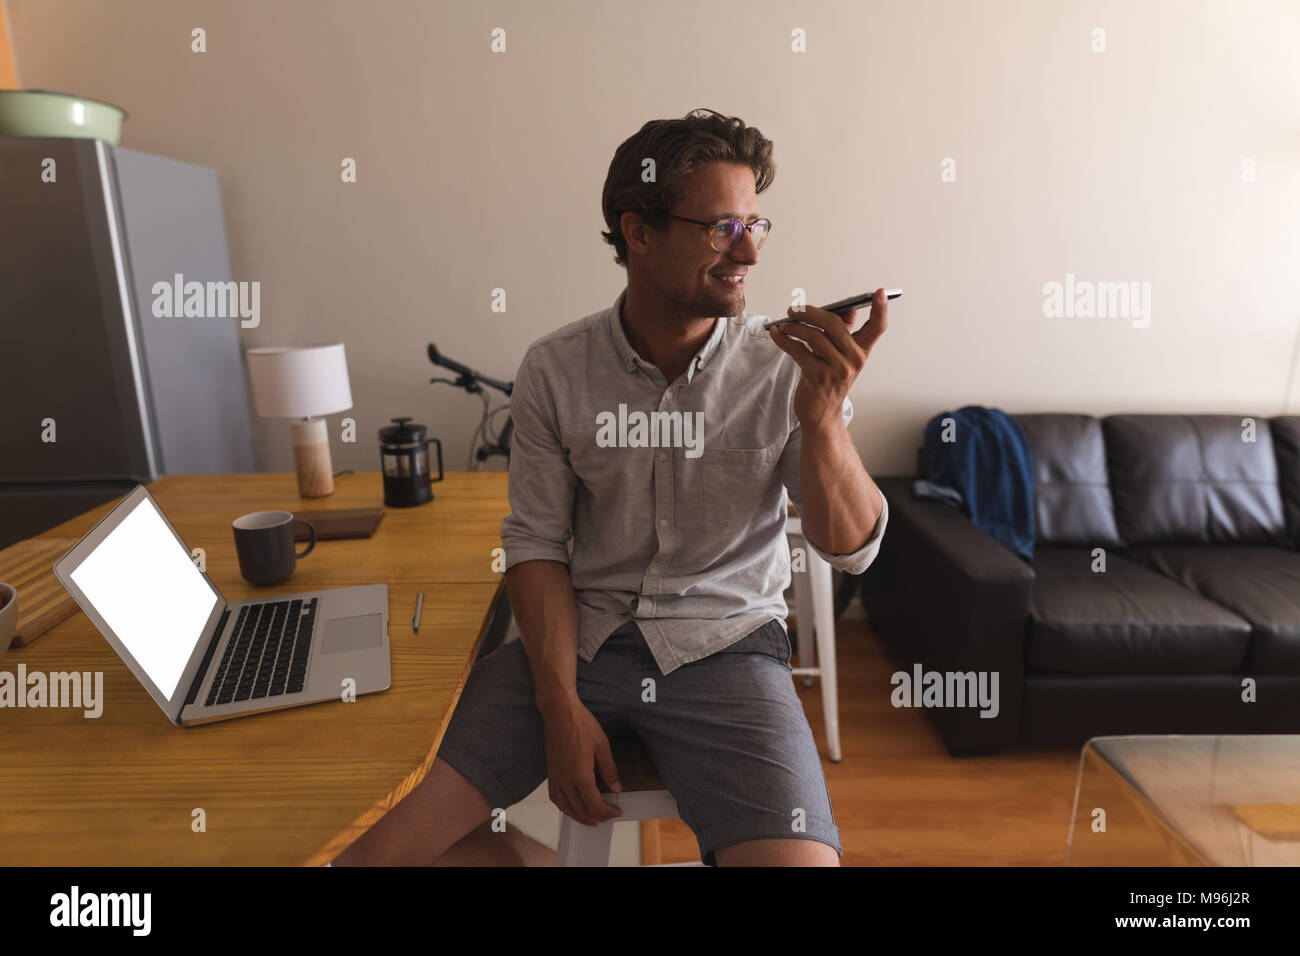 Man talking on mobile phone at home Stock Photo